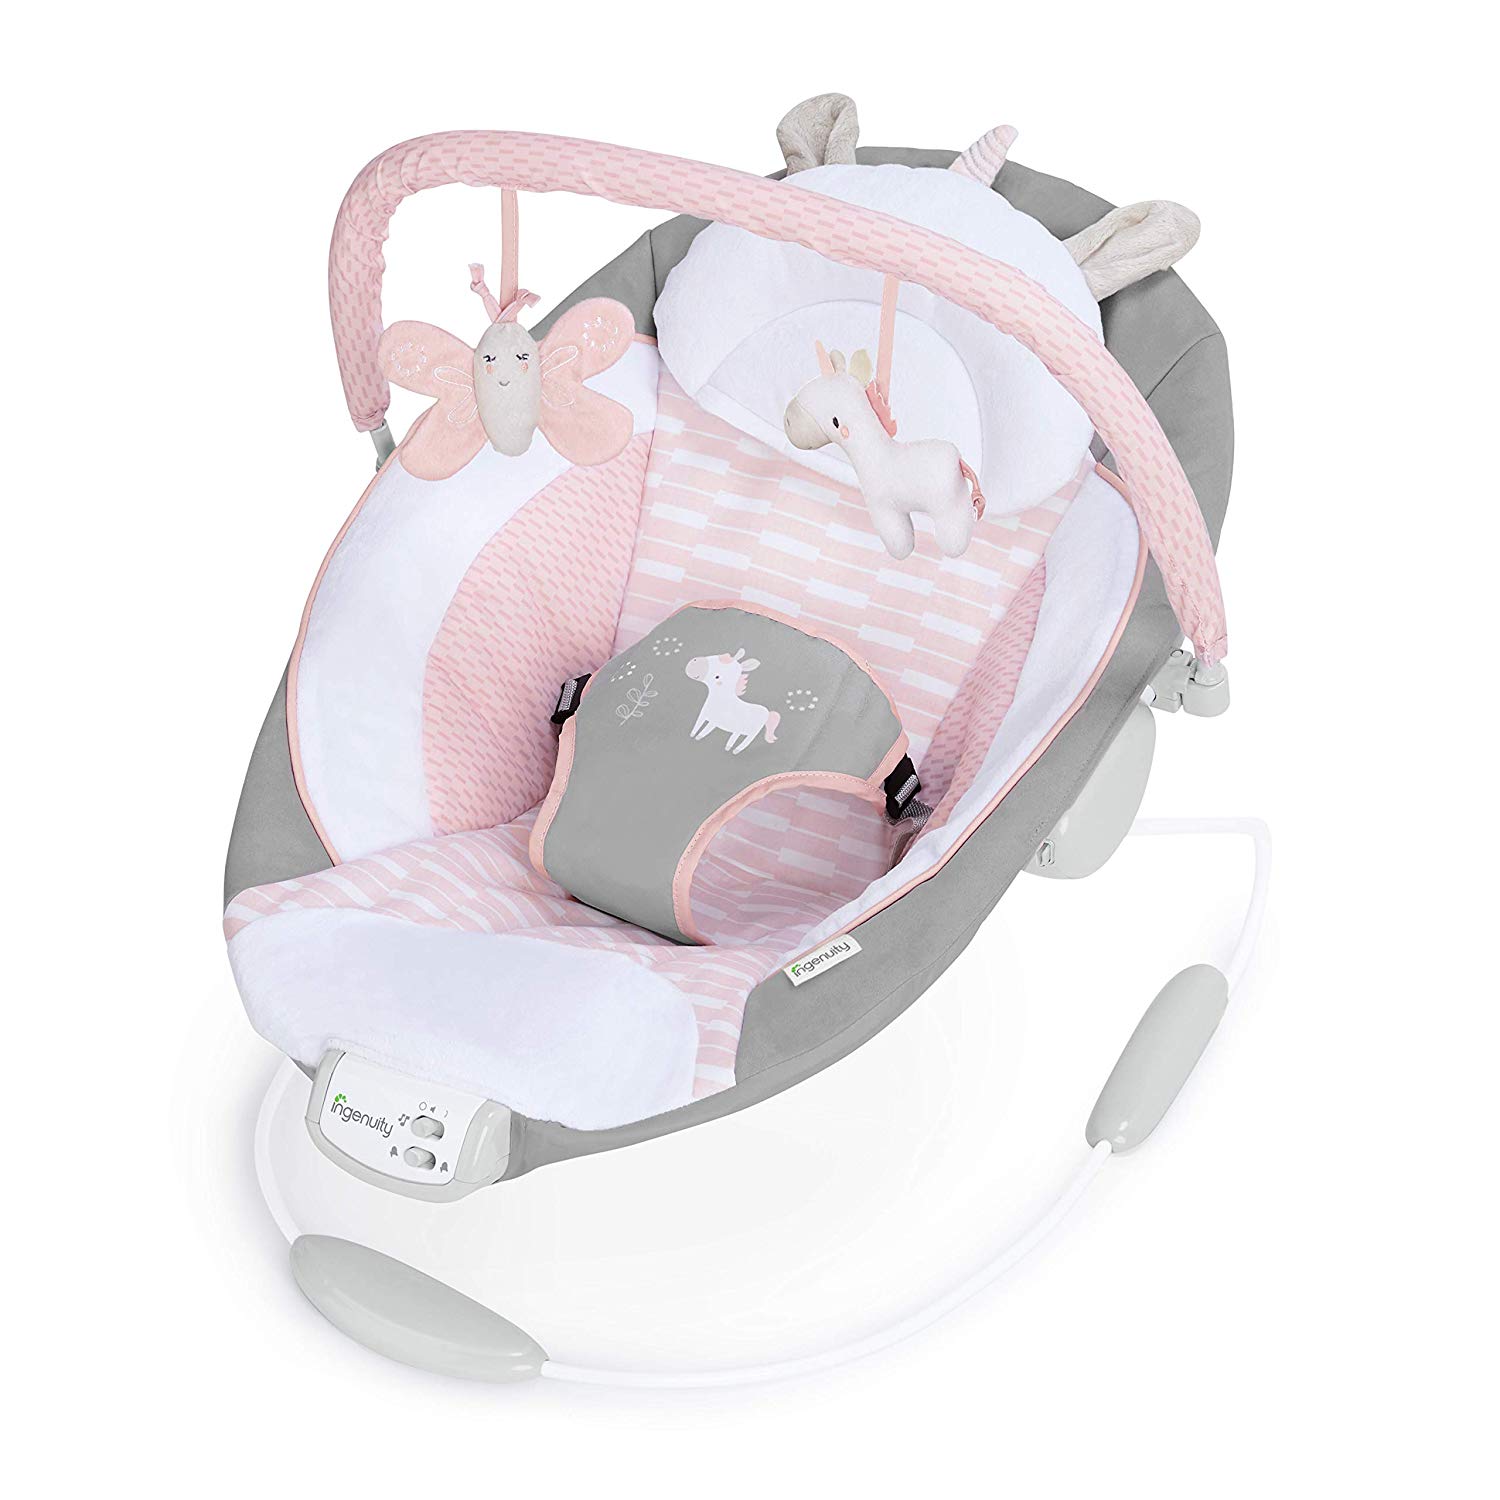 Ingenuity, vibrating rocker with music, volume controls, toys, padded headrest, seat belt, non-slip feet and more, Flora